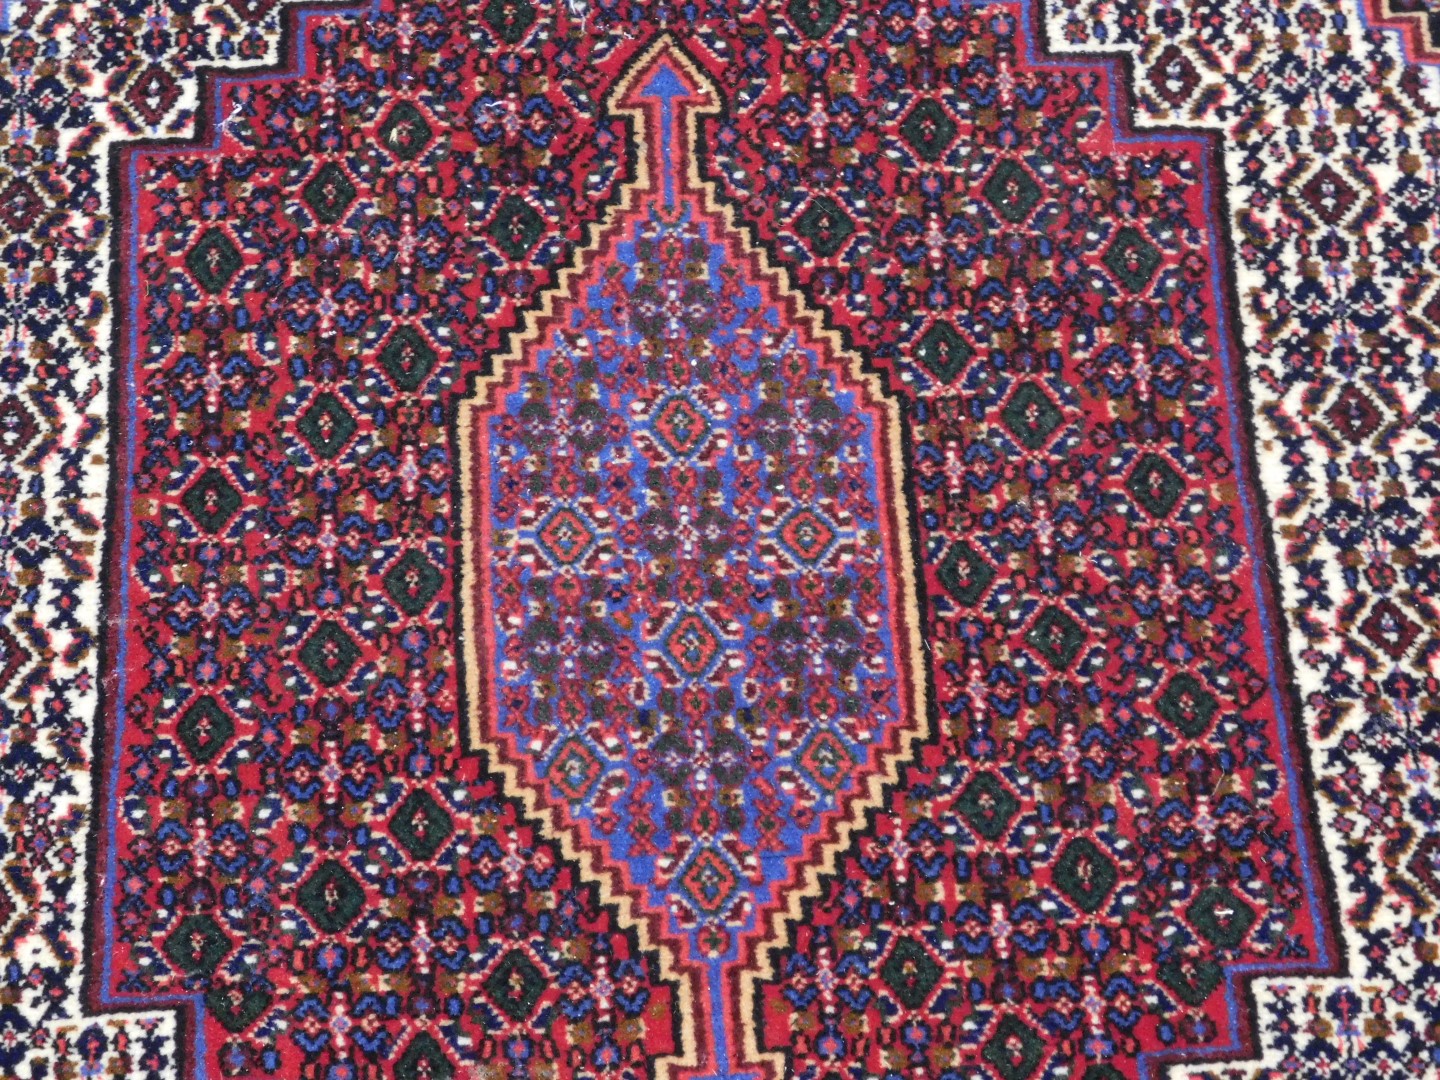 A Persian rug with a central medallion, surrounded by geometric motifs in red, cream pink and blue, - Image 2 of 3